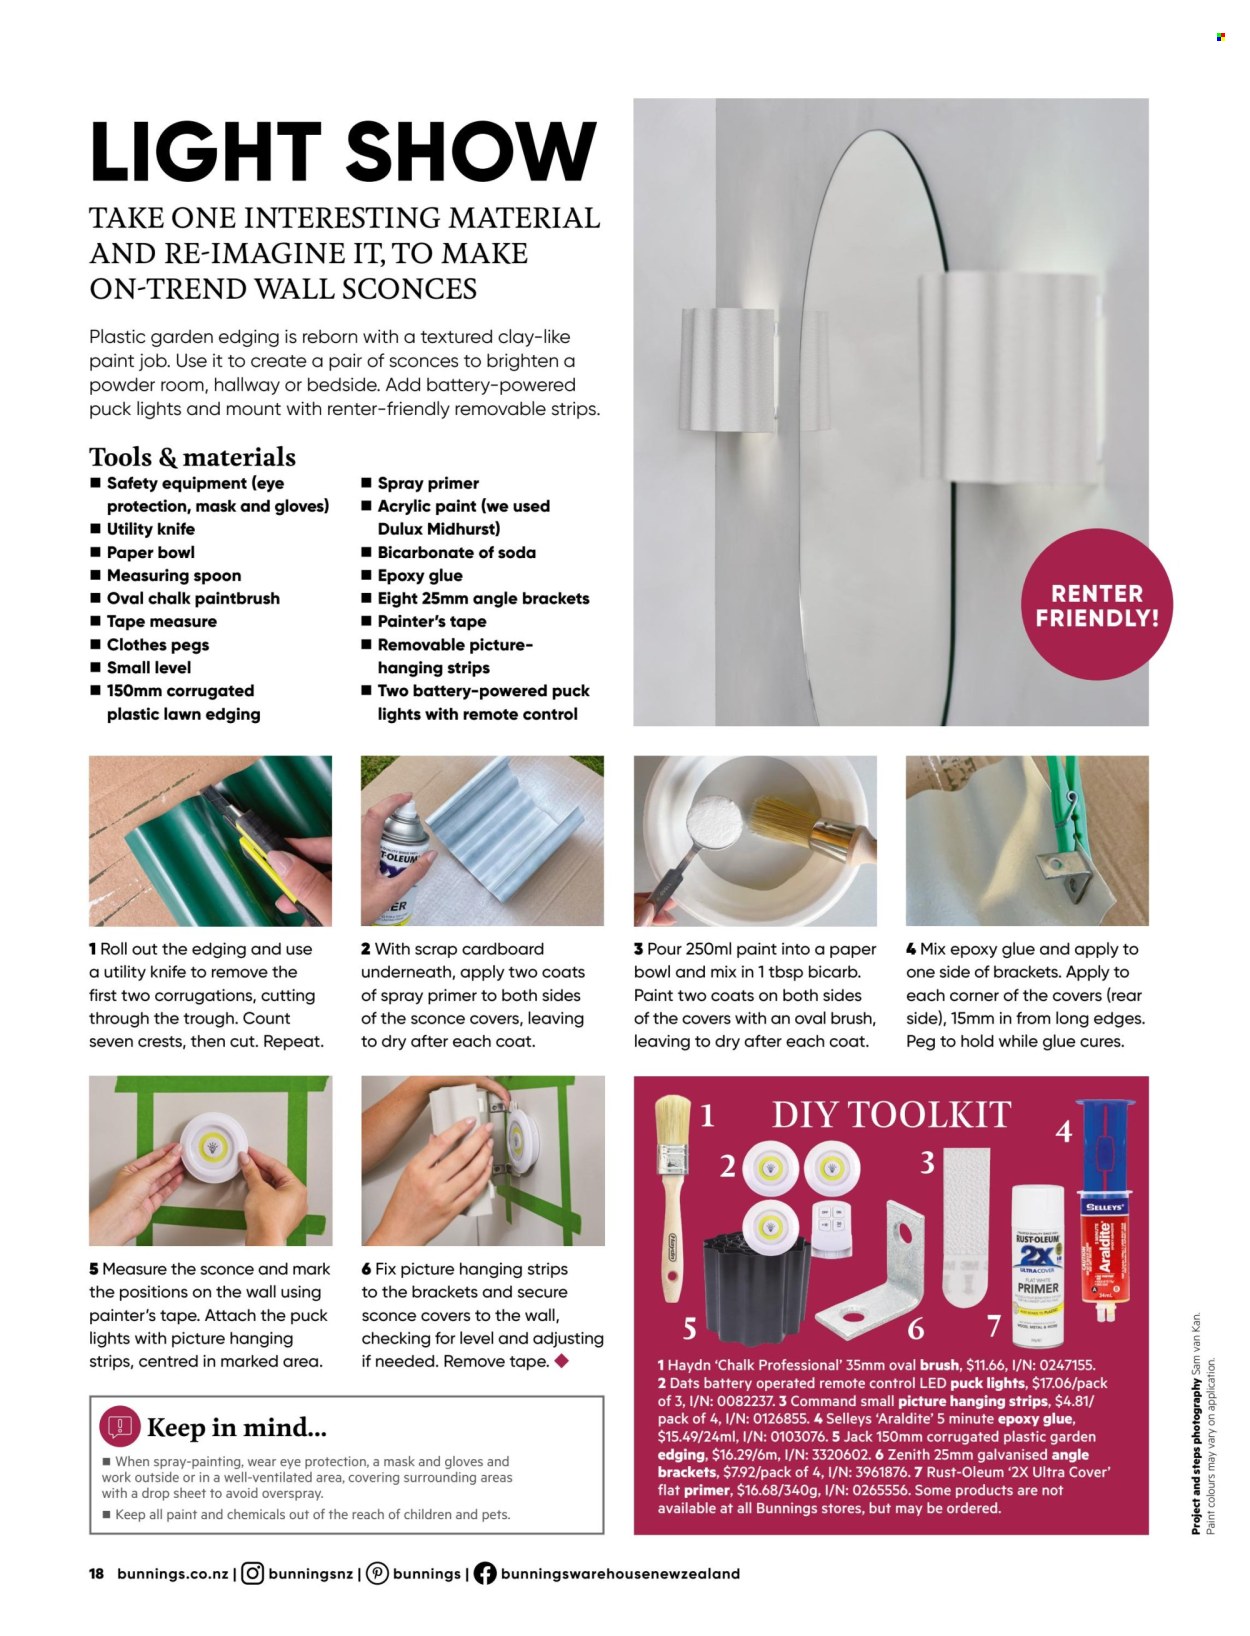 thumbnail - Bunnings Warehouse mailer - Sales products - picture hanging strip, clothes peg, brush, spoon, glue, Plasto, plastic drop sheet, paint accessories, Dulux, LED light, measuring tape, utility knife, angle brackets. Page 18.